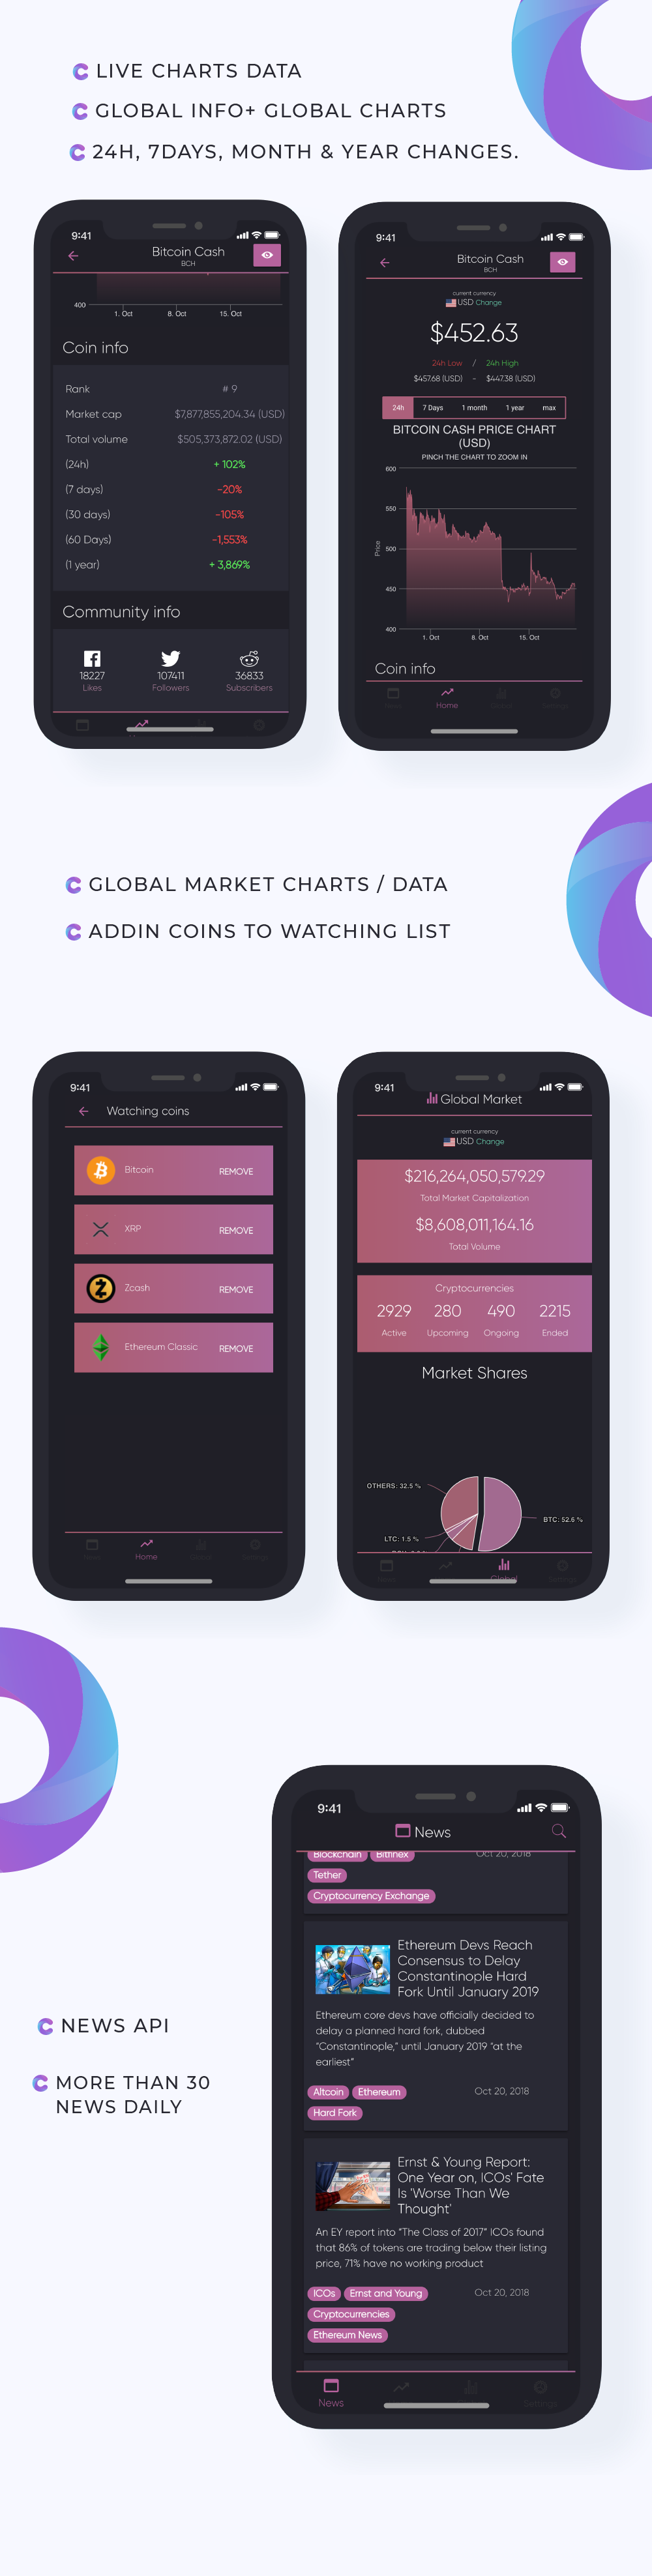 Cryptoz - Full cryptocurrency app for live tracking and watching cryptocurrencies rates ANDROID/IOS - 3